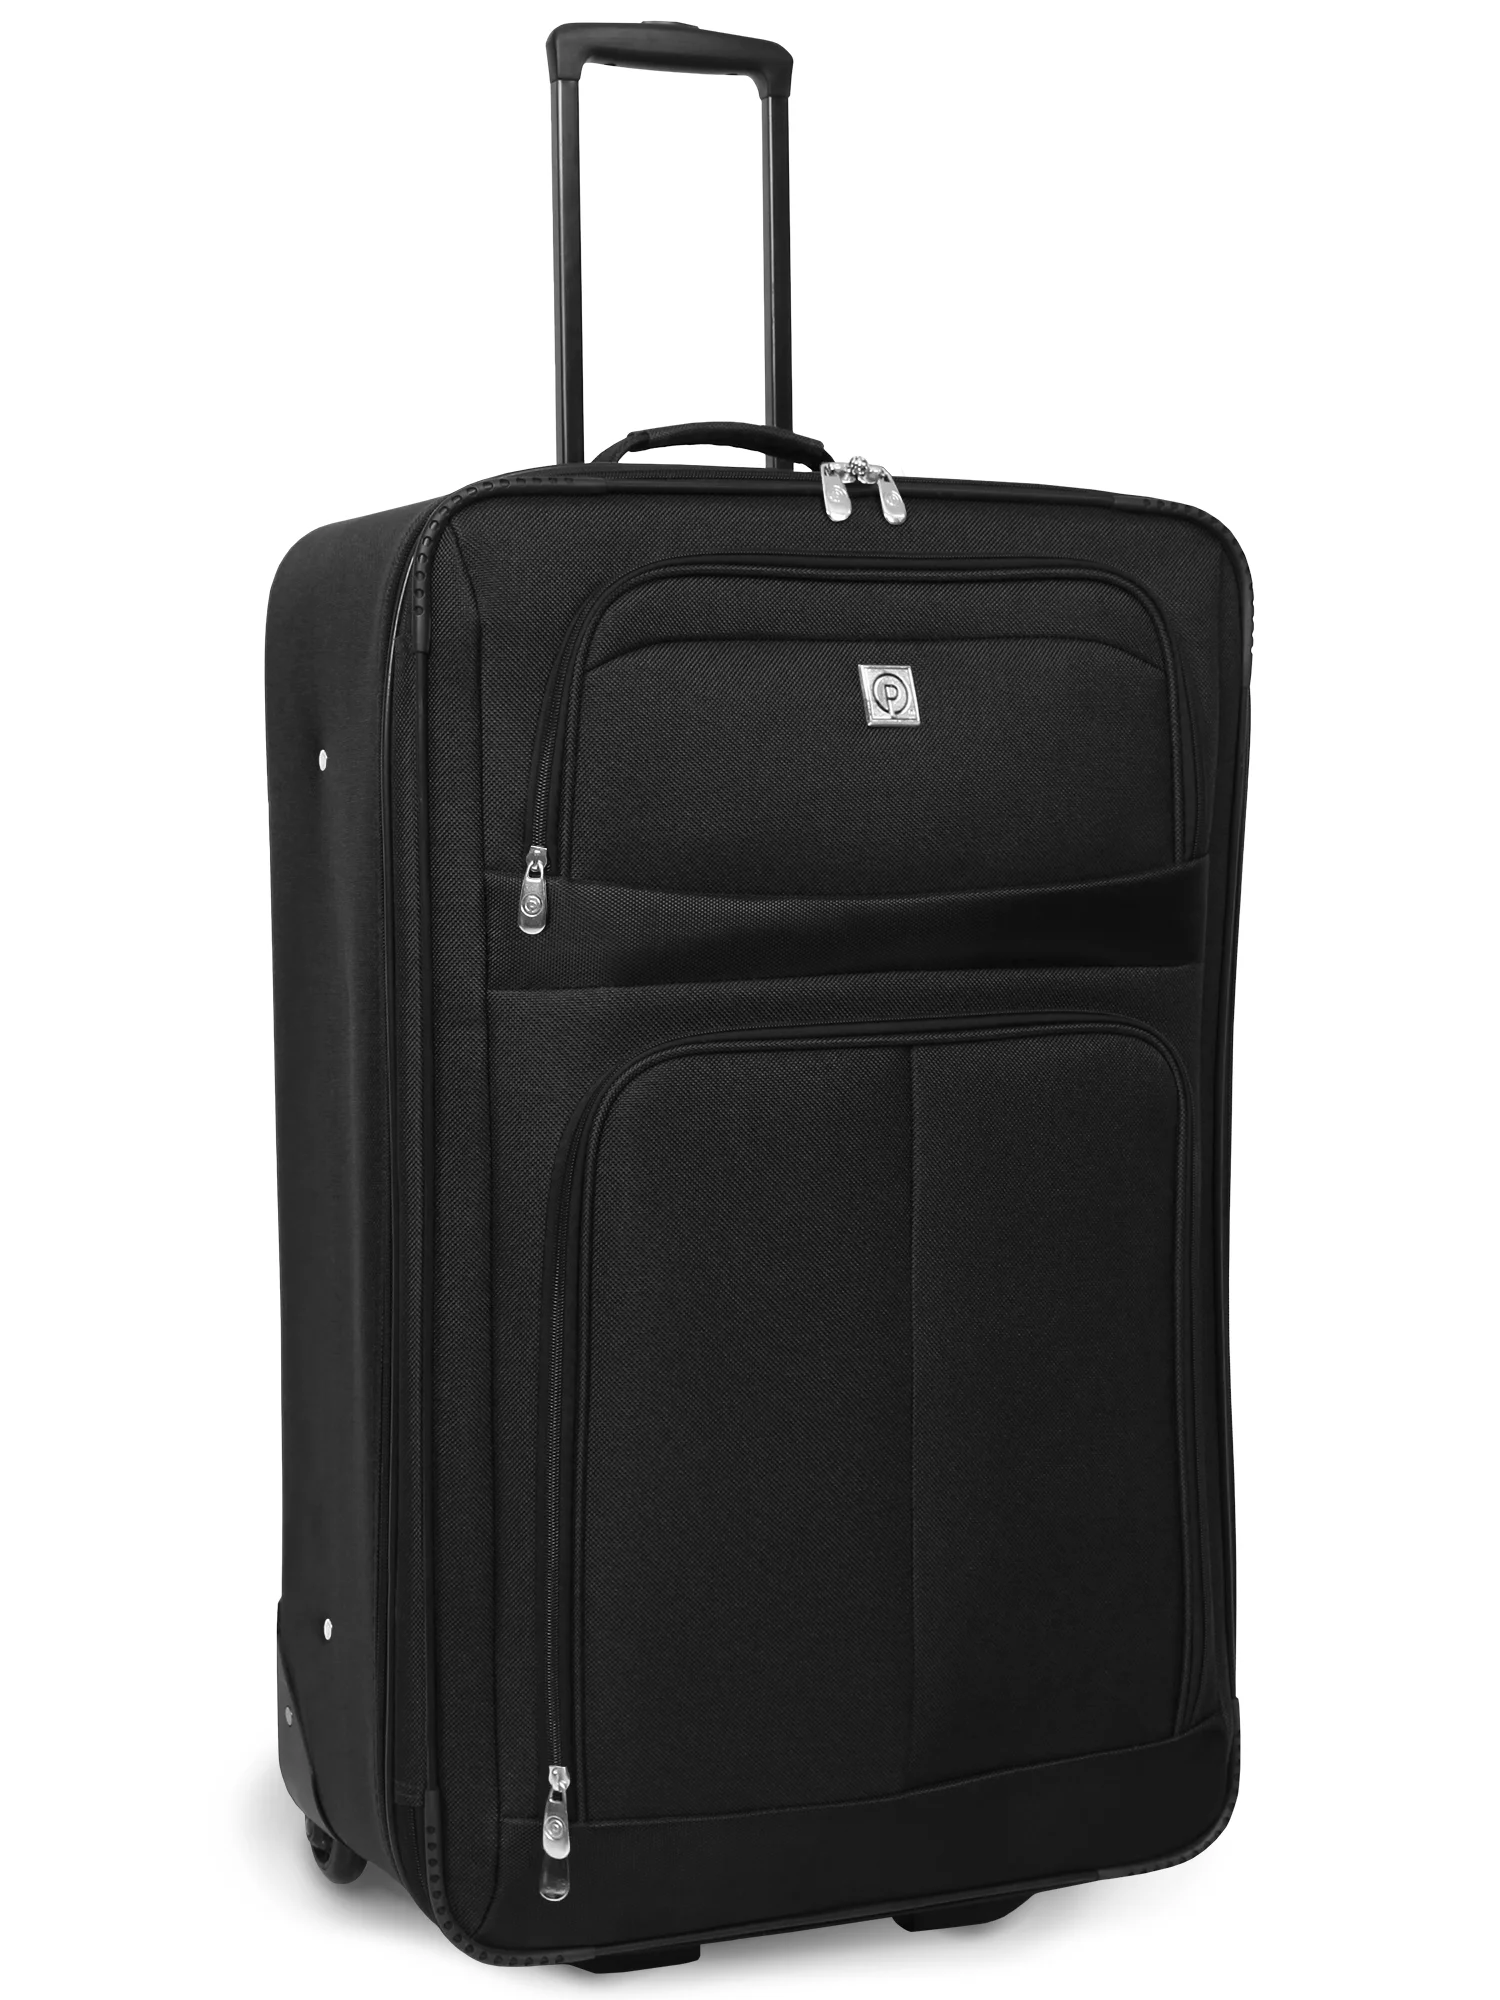 Protege 28 Inch Regency Soft Side Checked 2-Wheel Upright Luggage